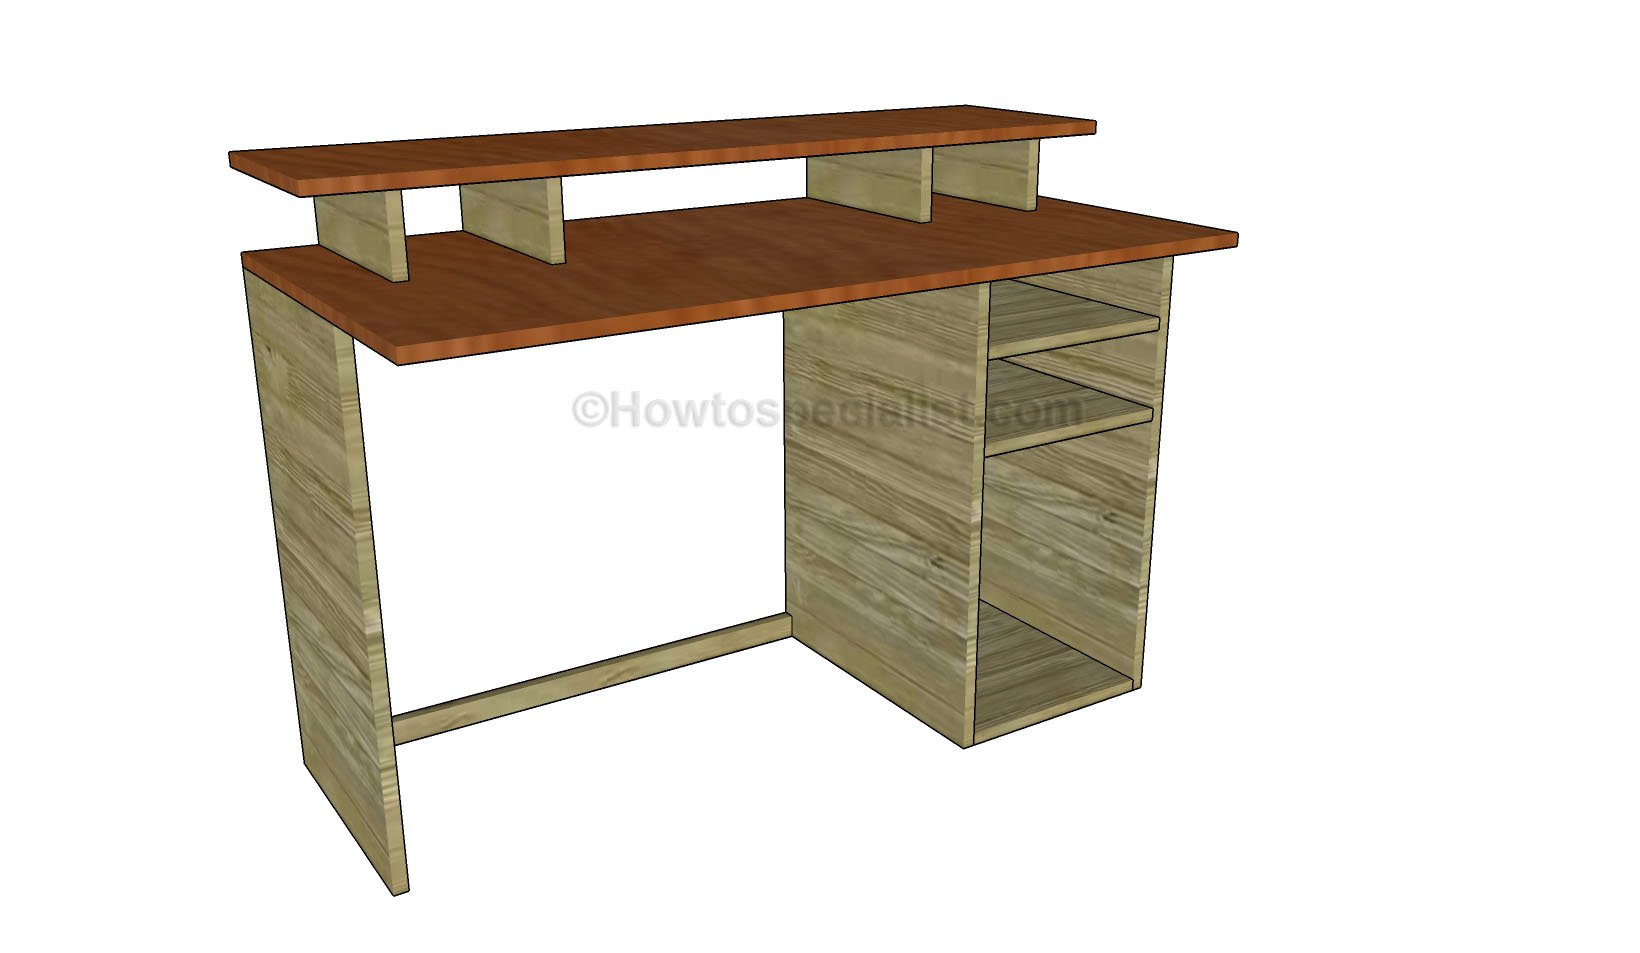 Free Computer Desk Plans | HowToSpecialist - How to Build ...
